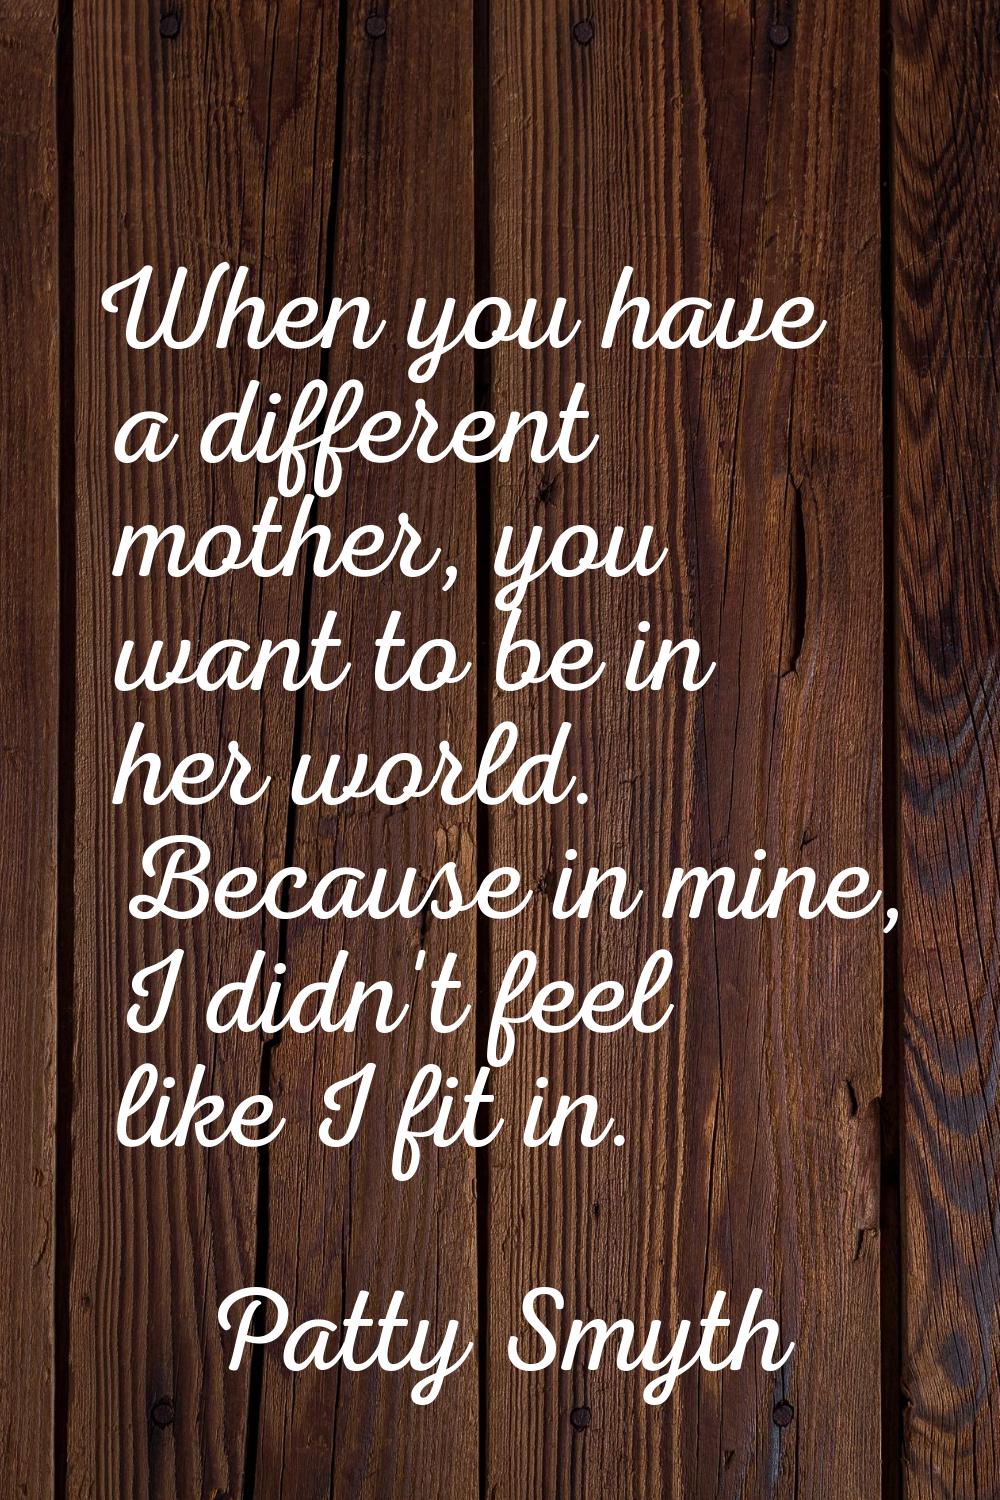 When you have a different mother, you want to be in her world. Because in mine, I didn't feel like 